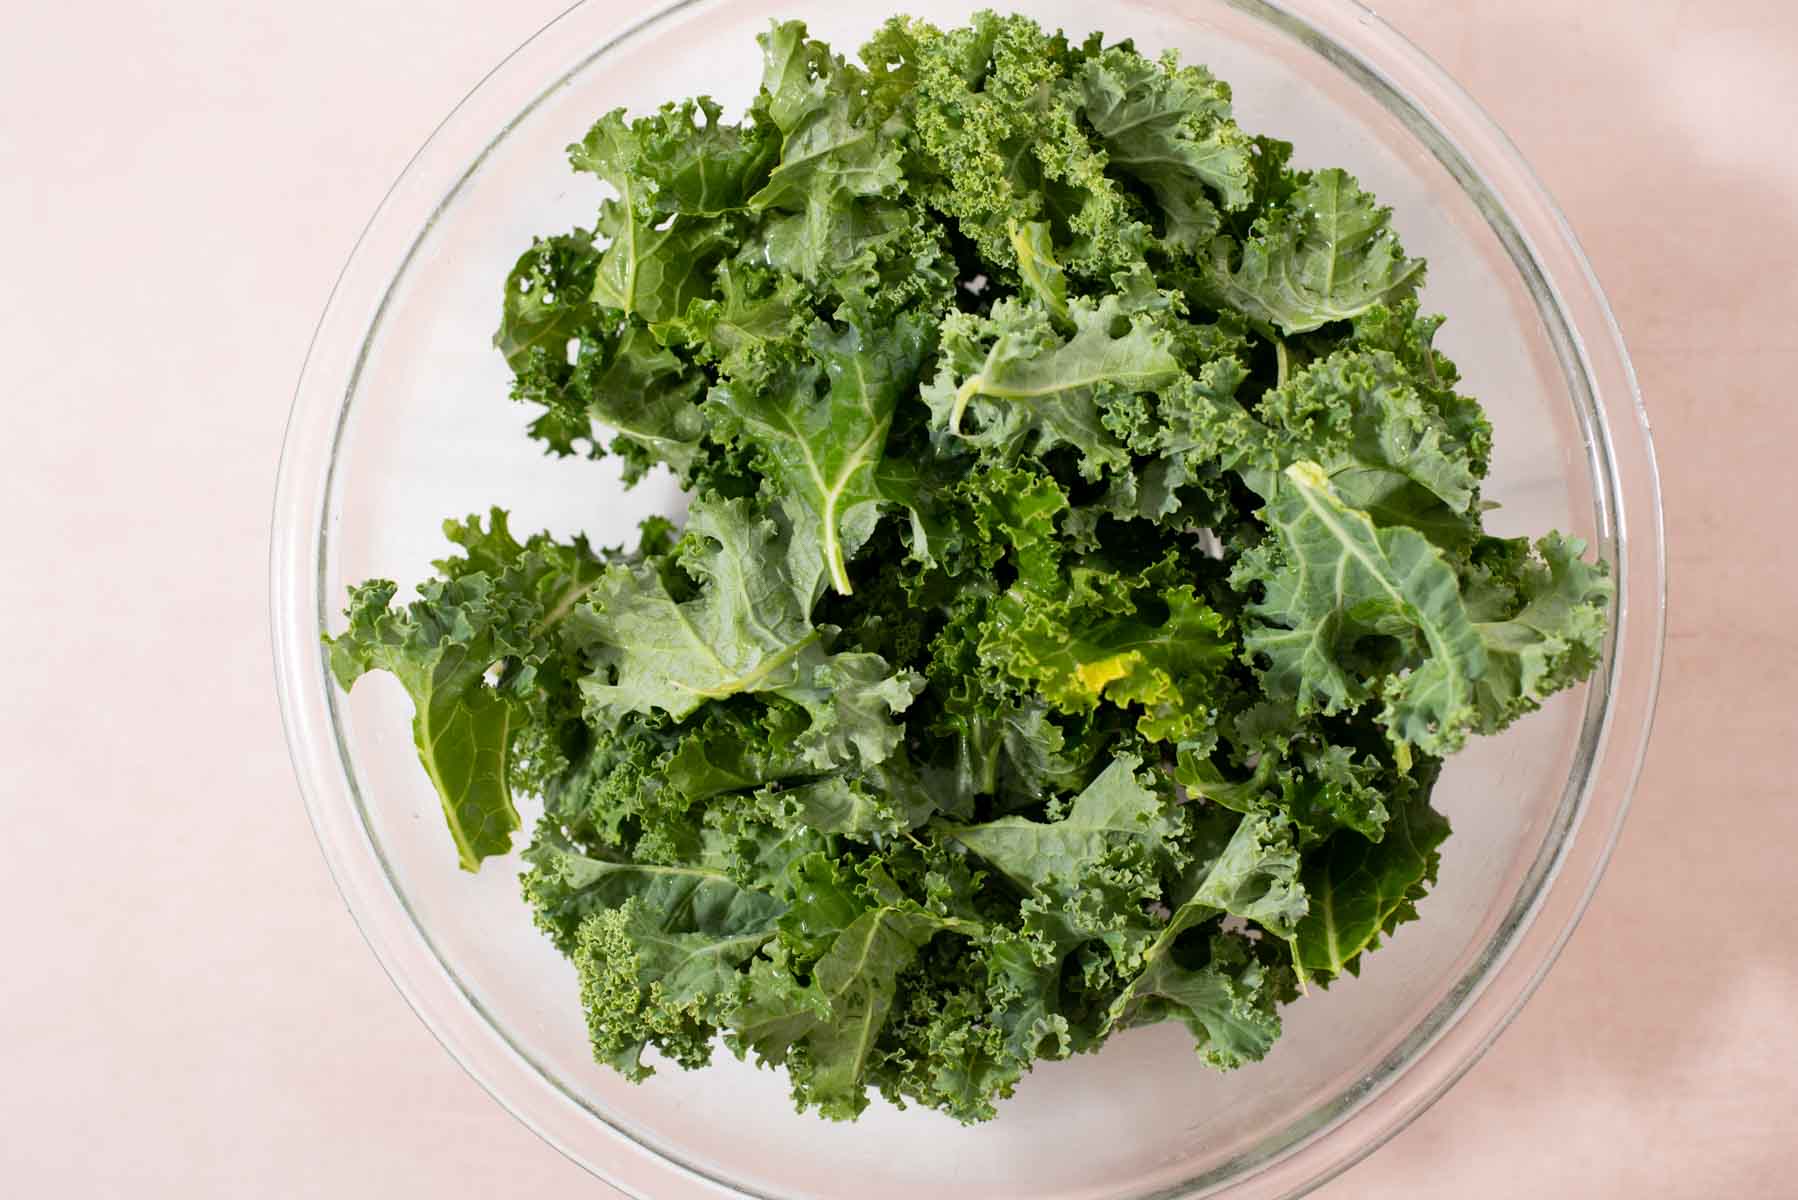 Raw kale pieces in a glass bowl.